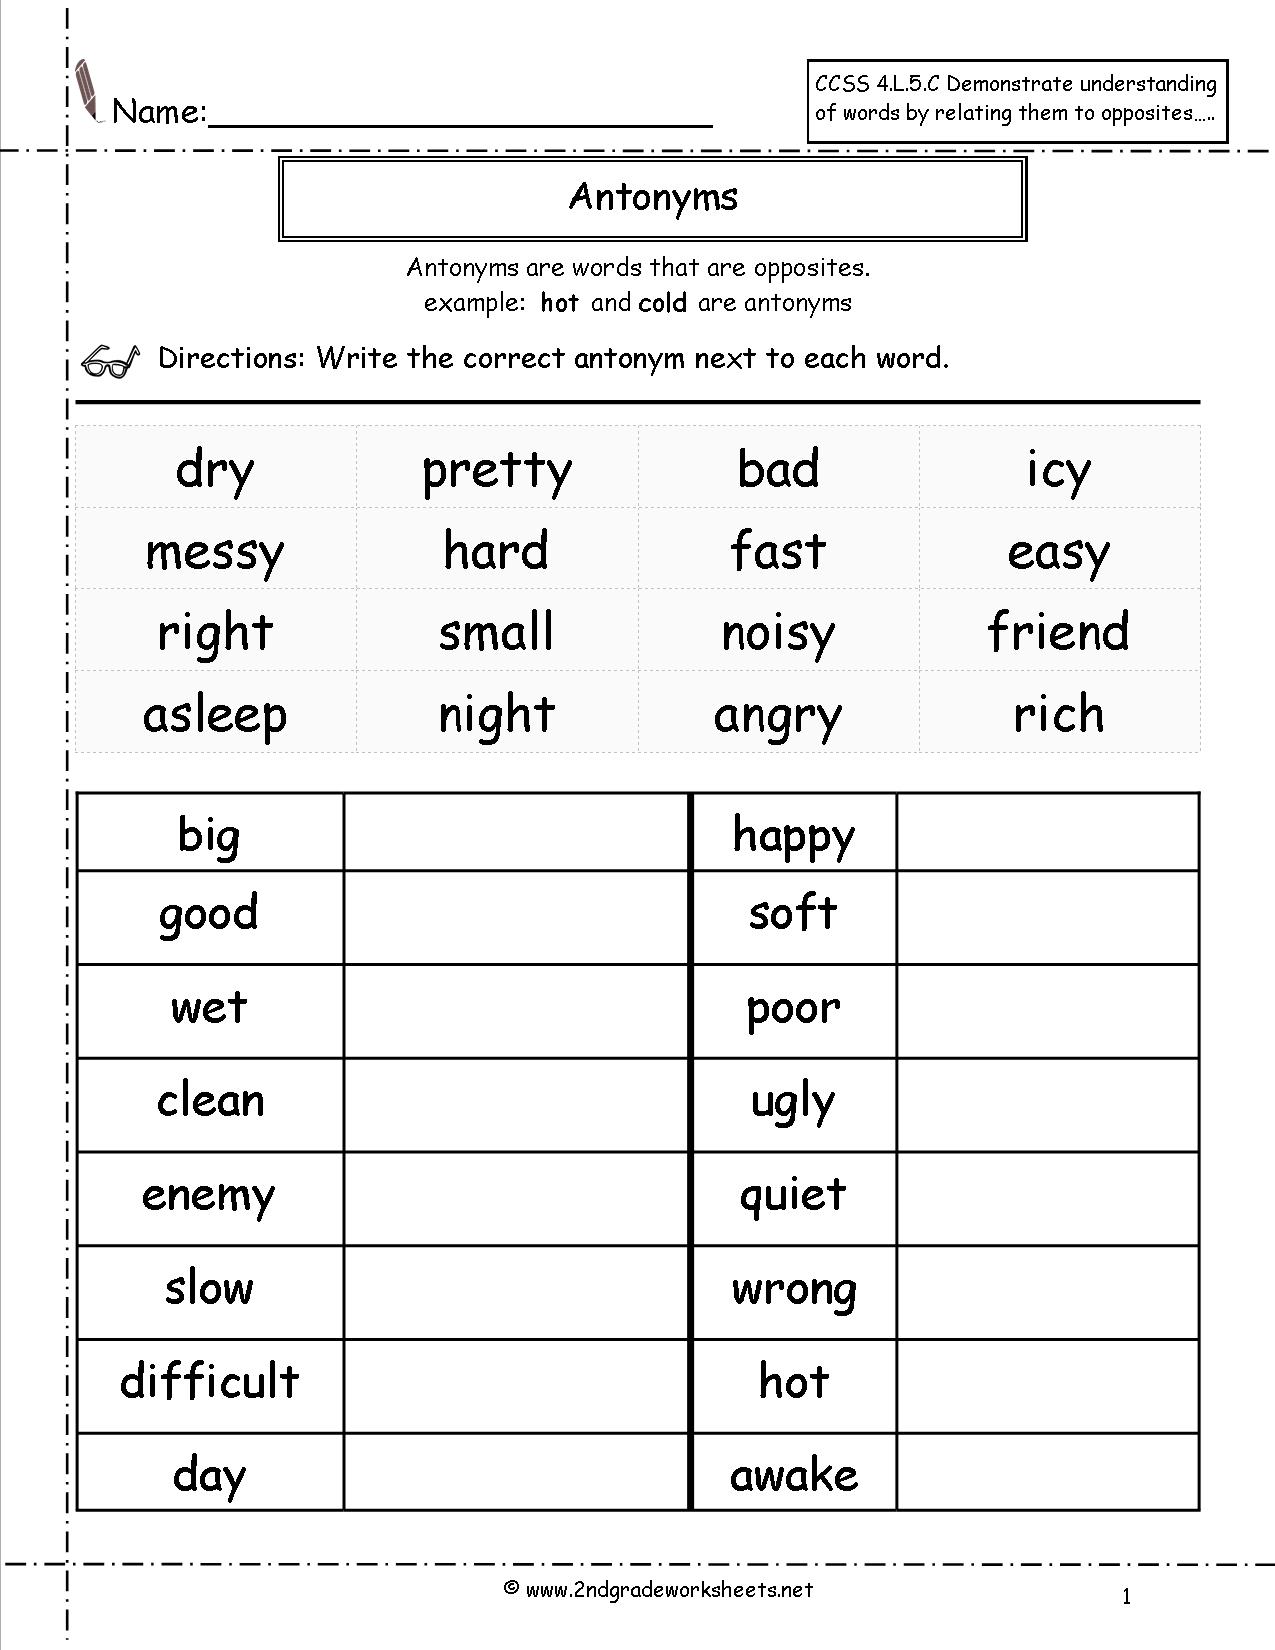 What is an antonym or synonym for the word 